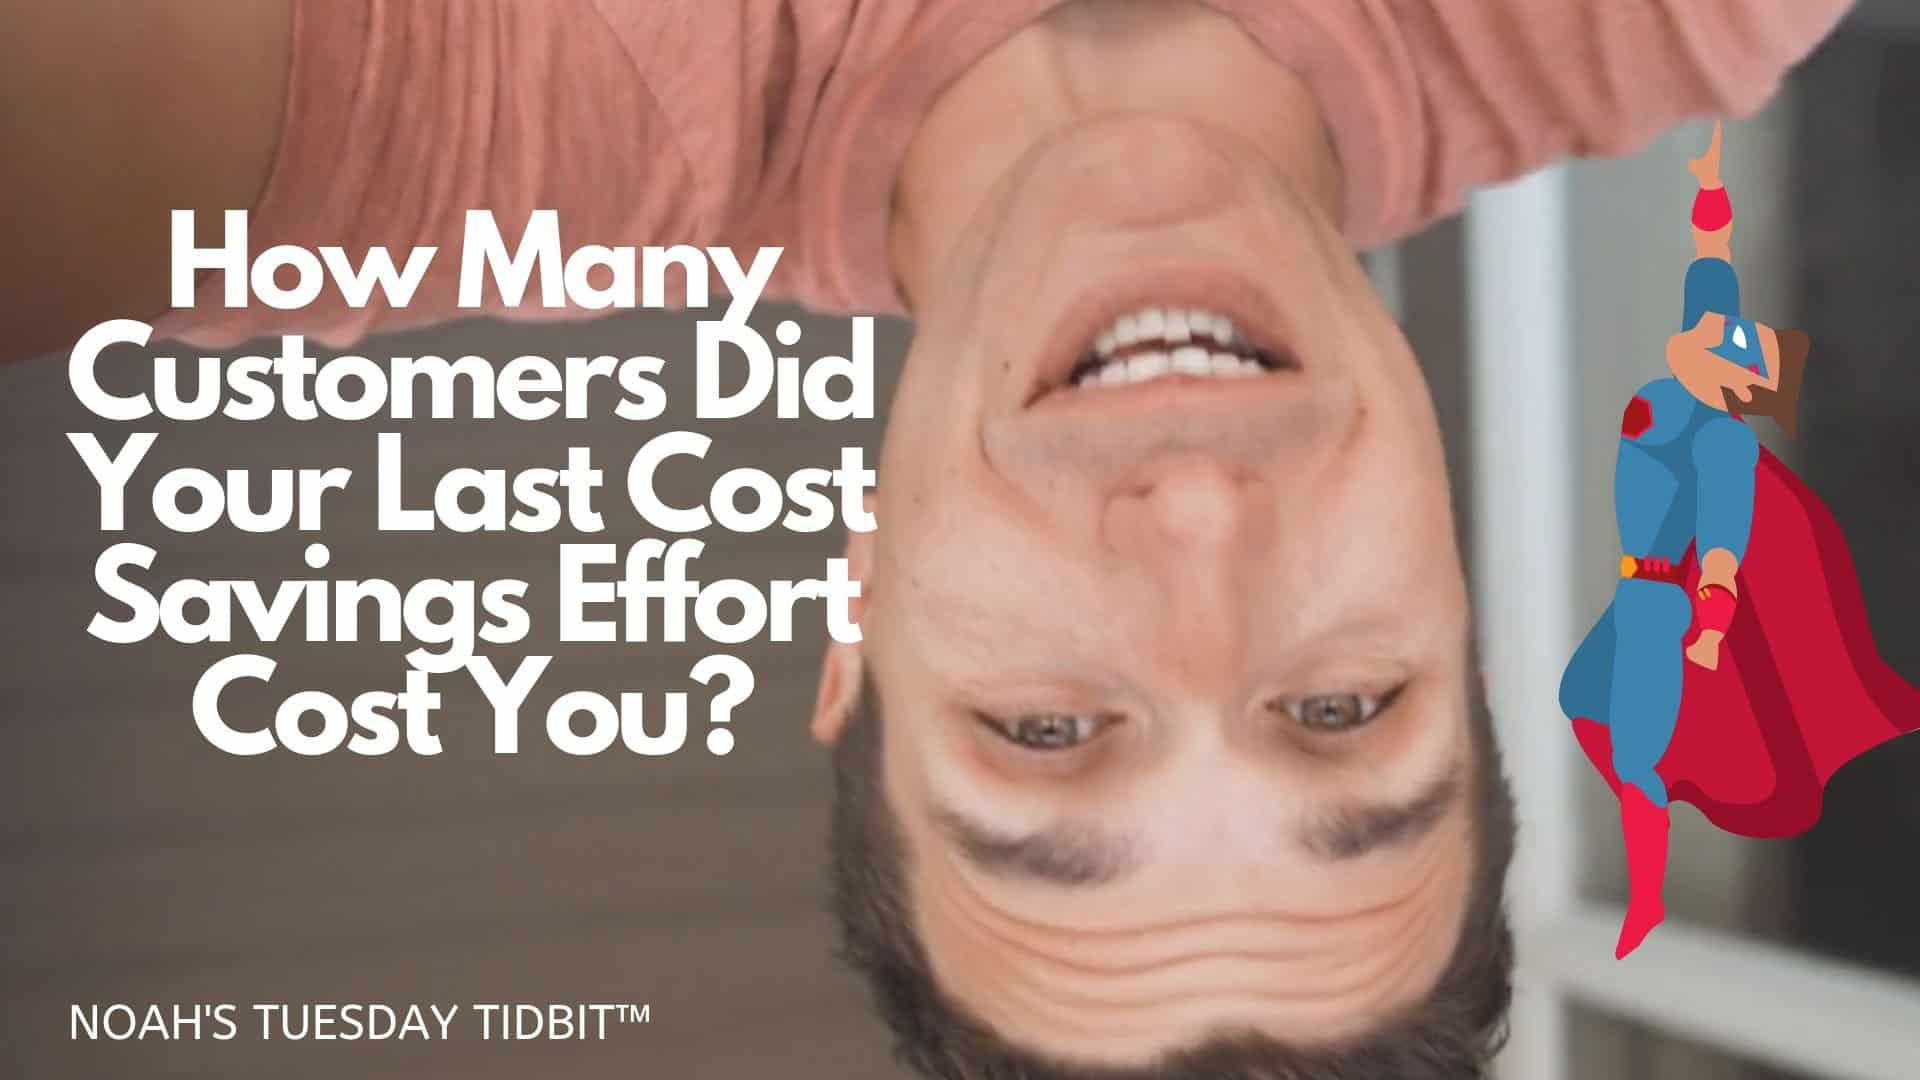 How Many Customers Did Your Last Cost Savings Effort Cost You?